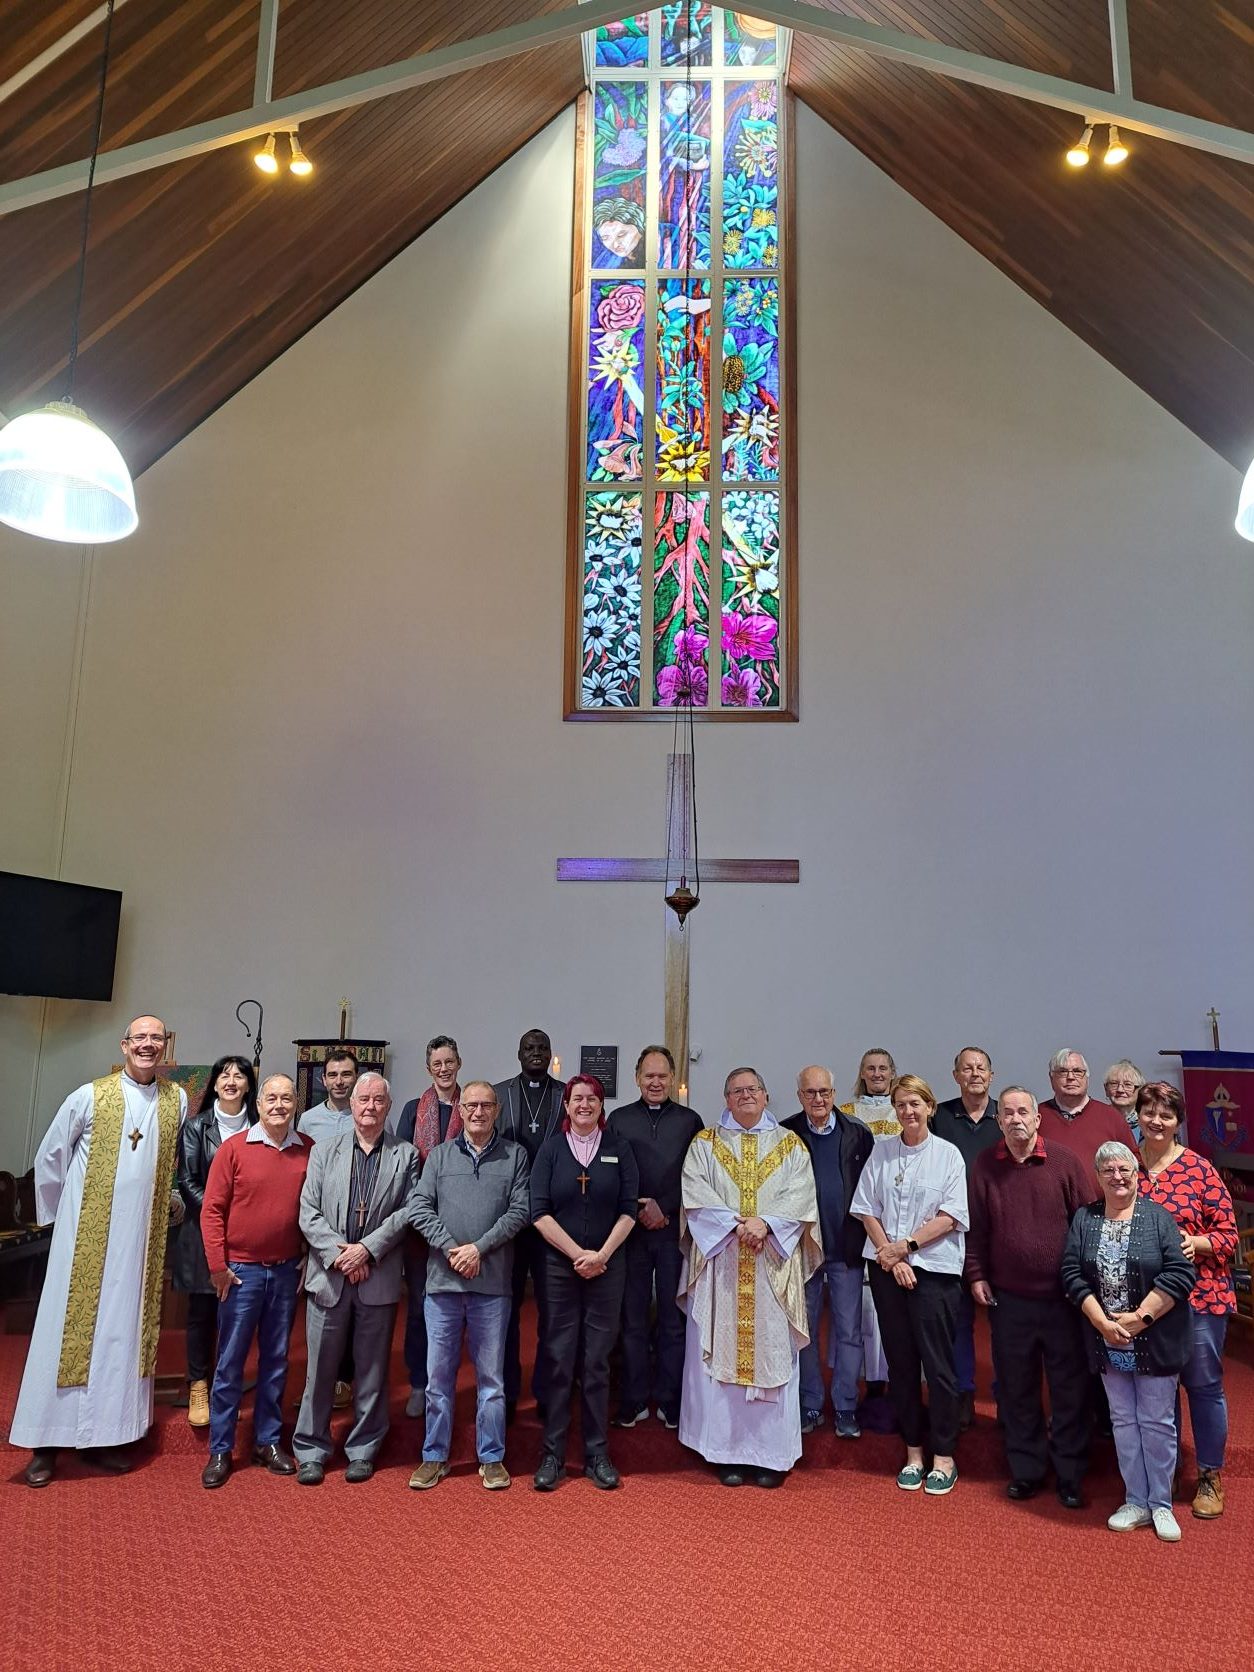 Clergy after the Western Region Clergy Muster final service and renewal of vows